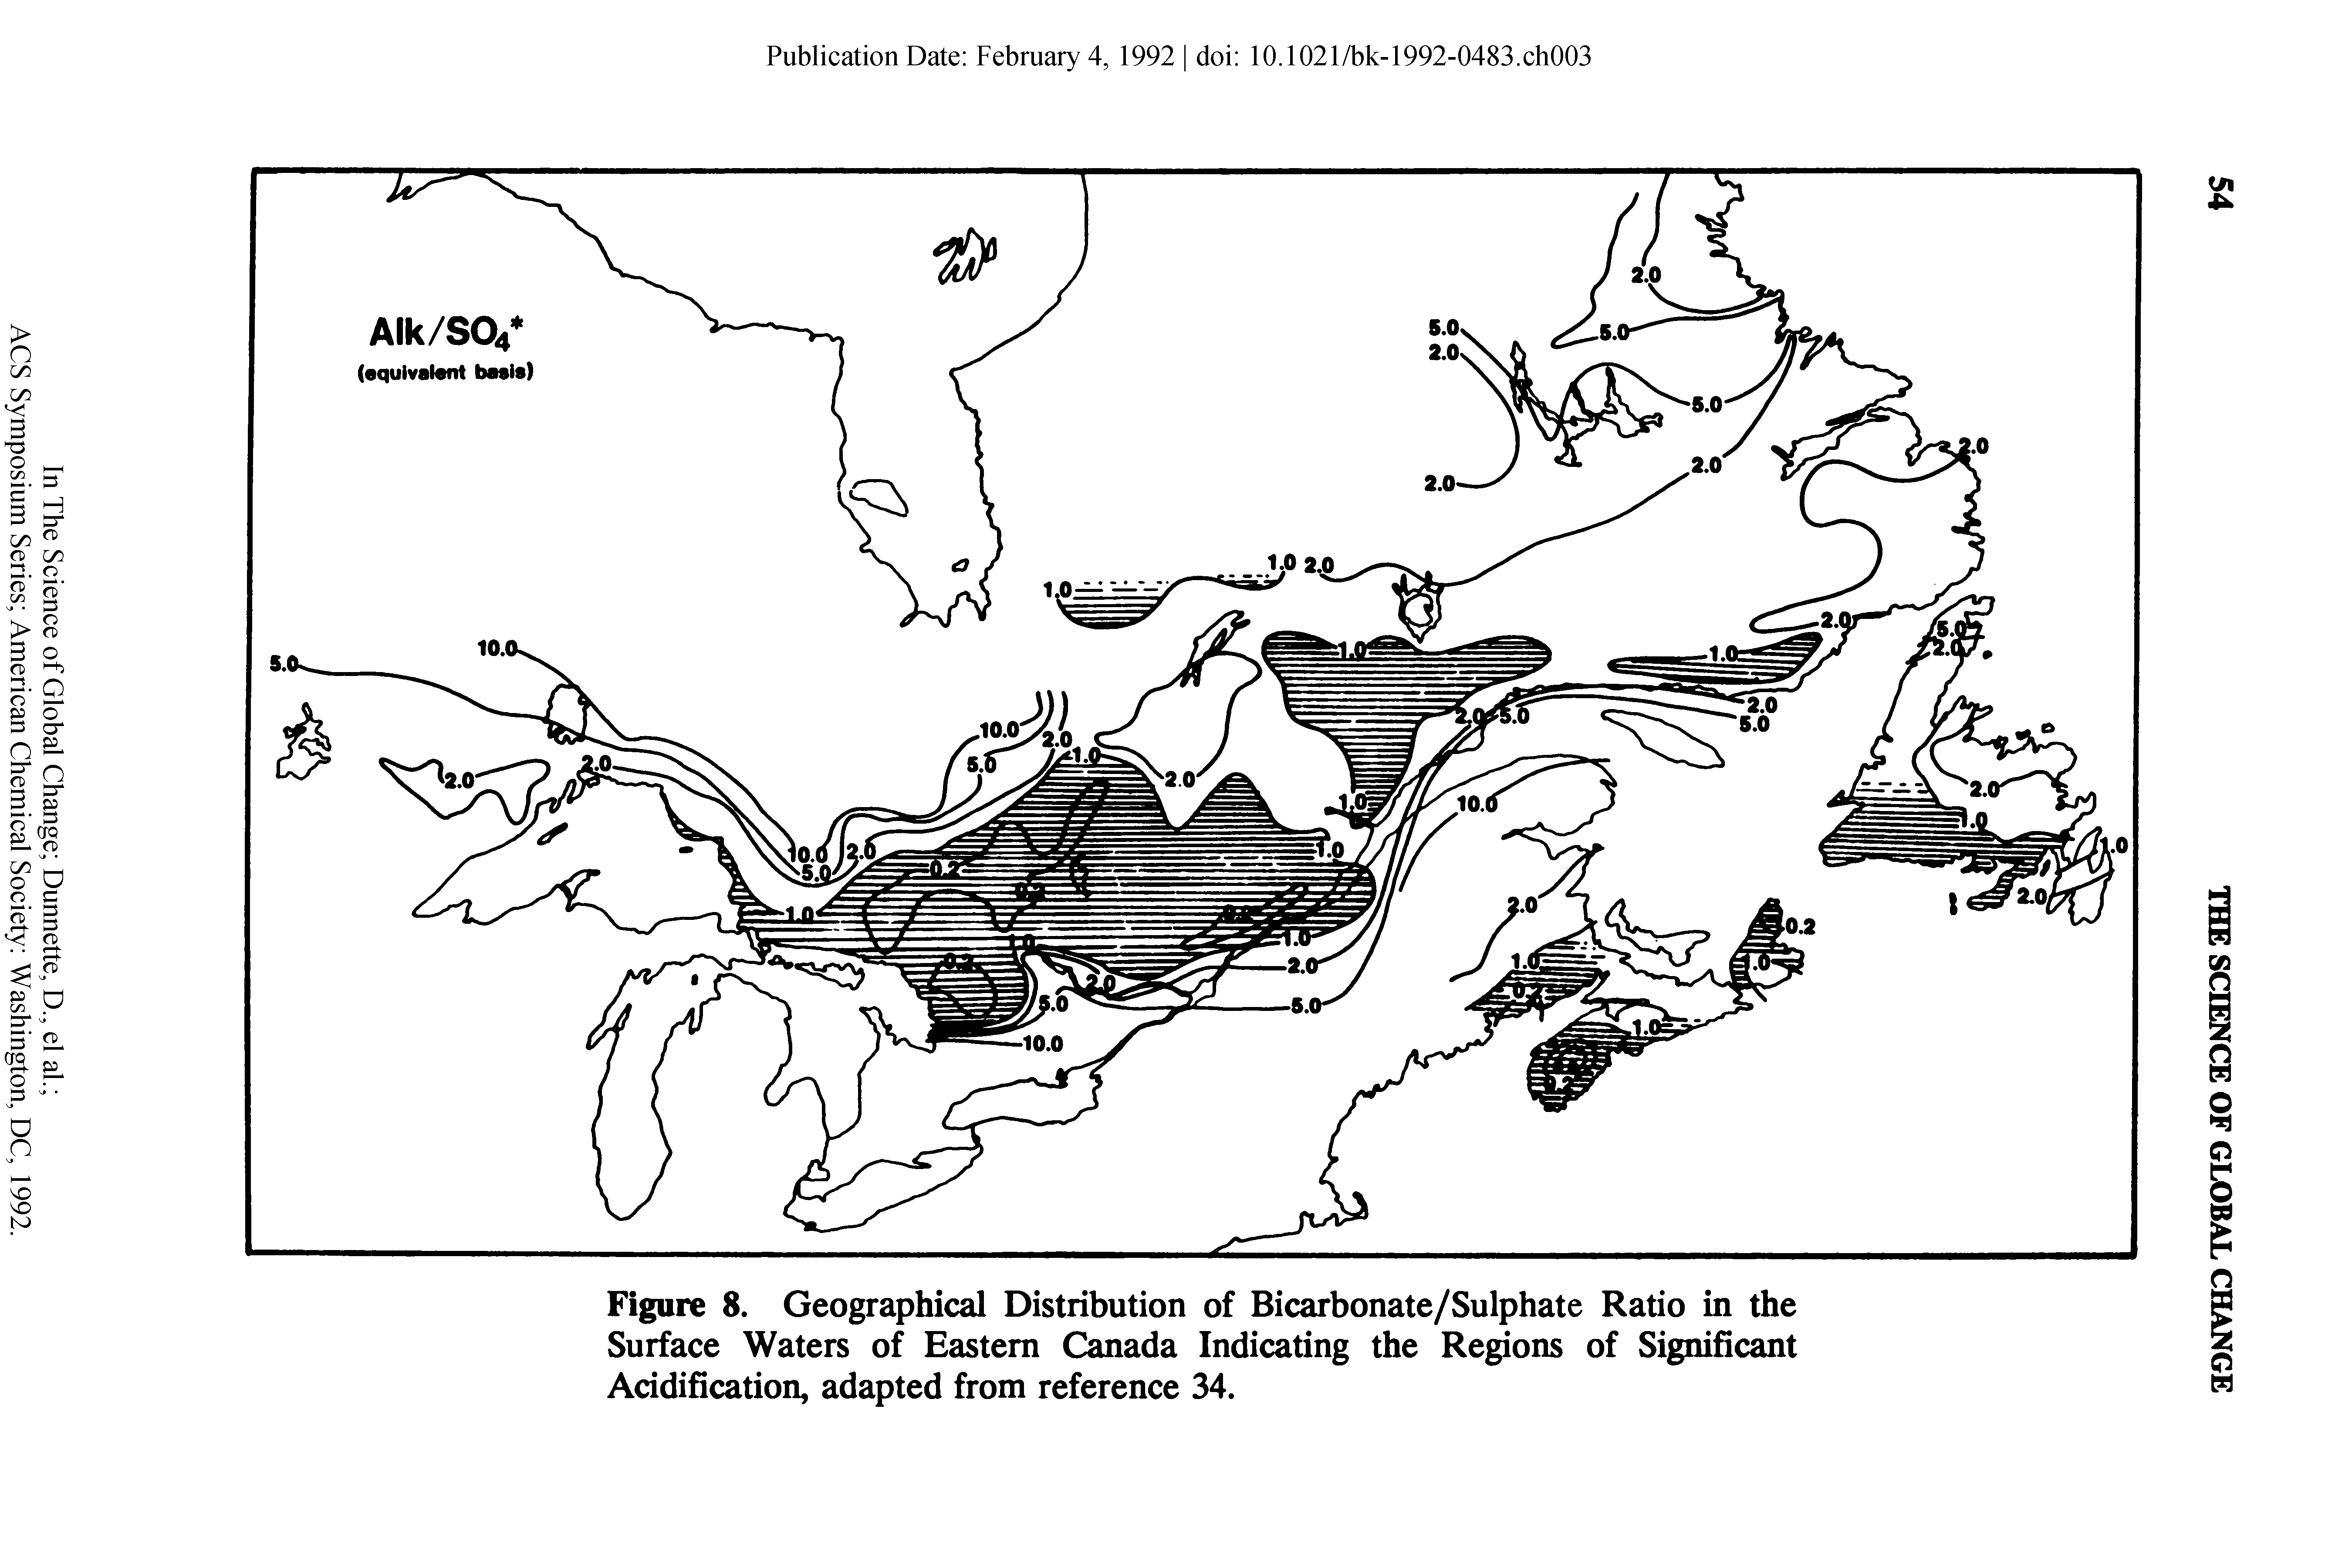 Figure 8. Geographical Distribution of Bicarbonate/Sulphate Ratio in the Surface Waters of Eastern Canada Indicating the Regions of Significant Acidification, adapted from reference 34.